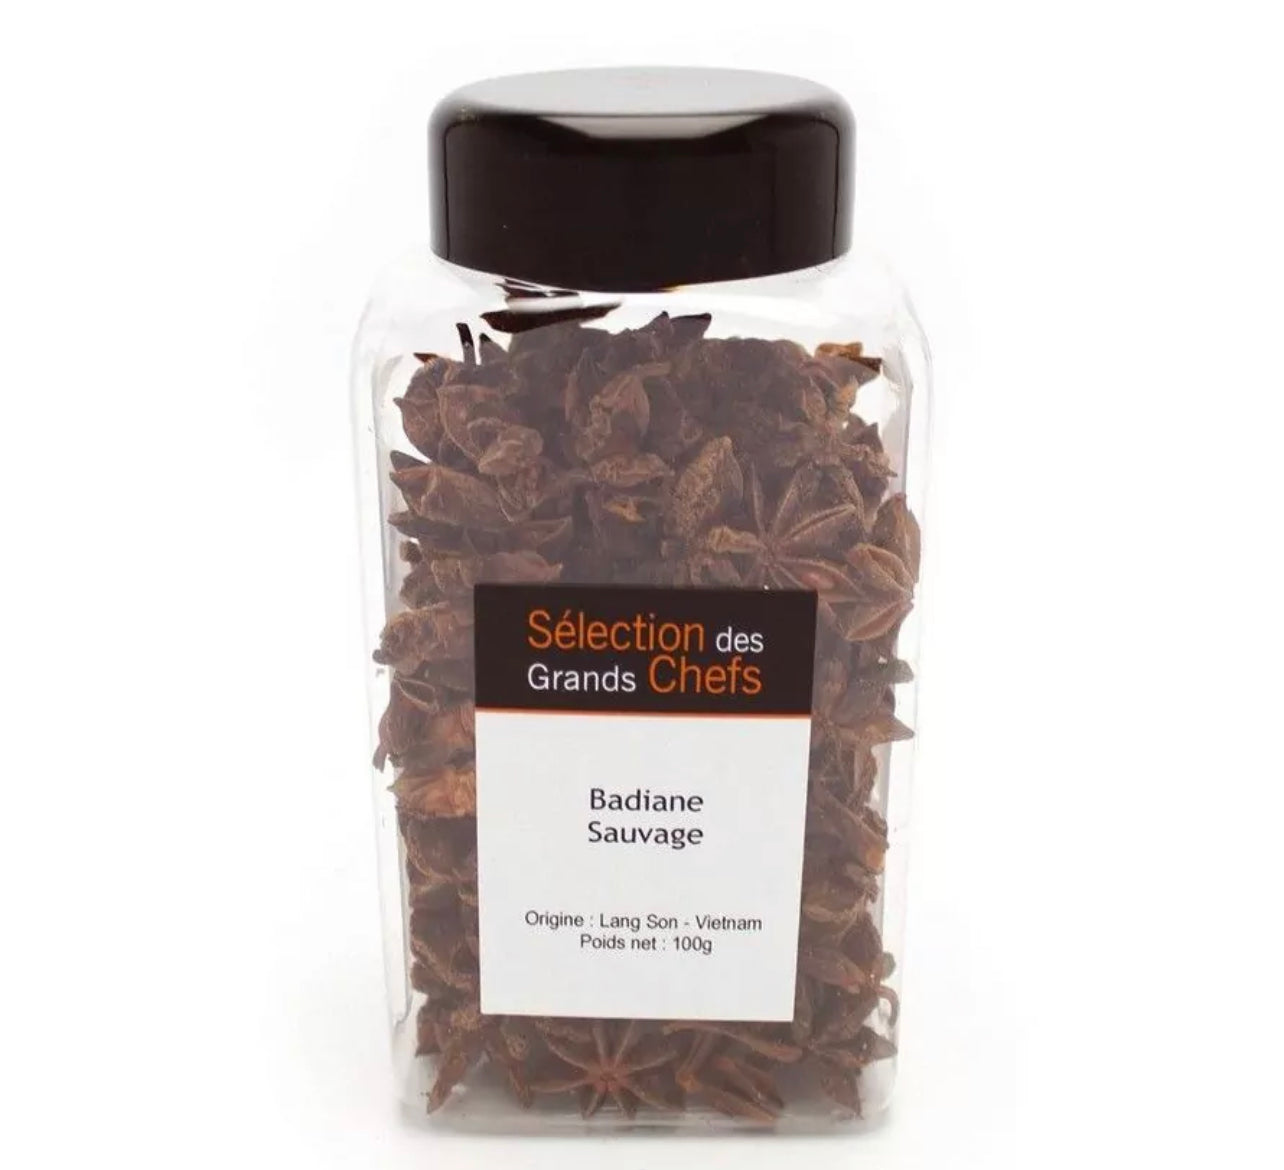 Wild star anise from Lang Son Vietnam - 100g